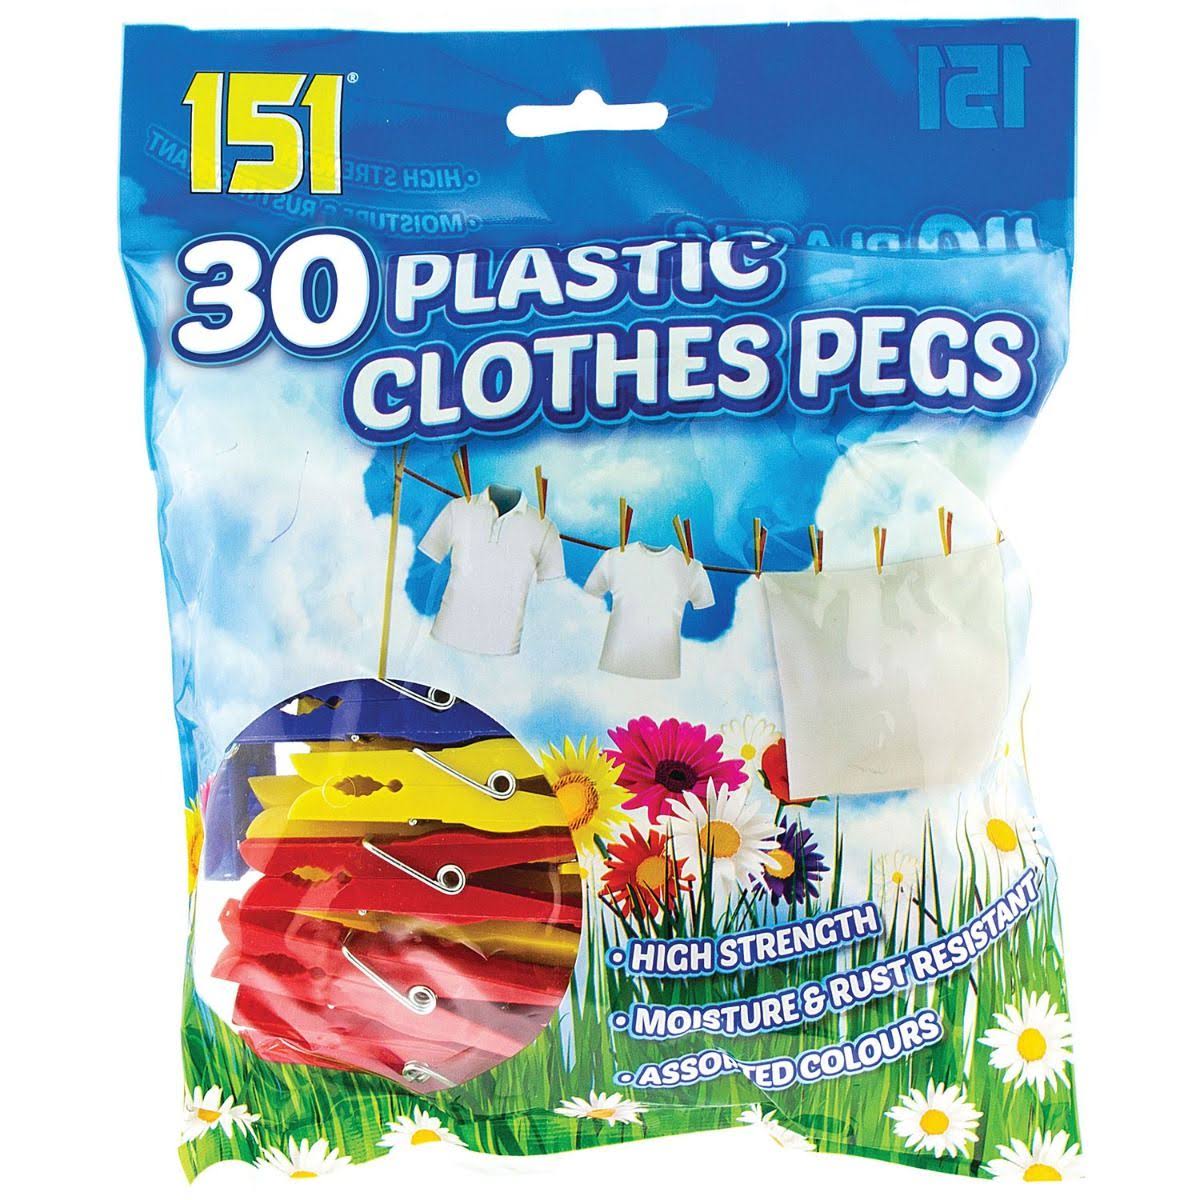 Angel 151 Plastic Clothes Pegs 30 Pack